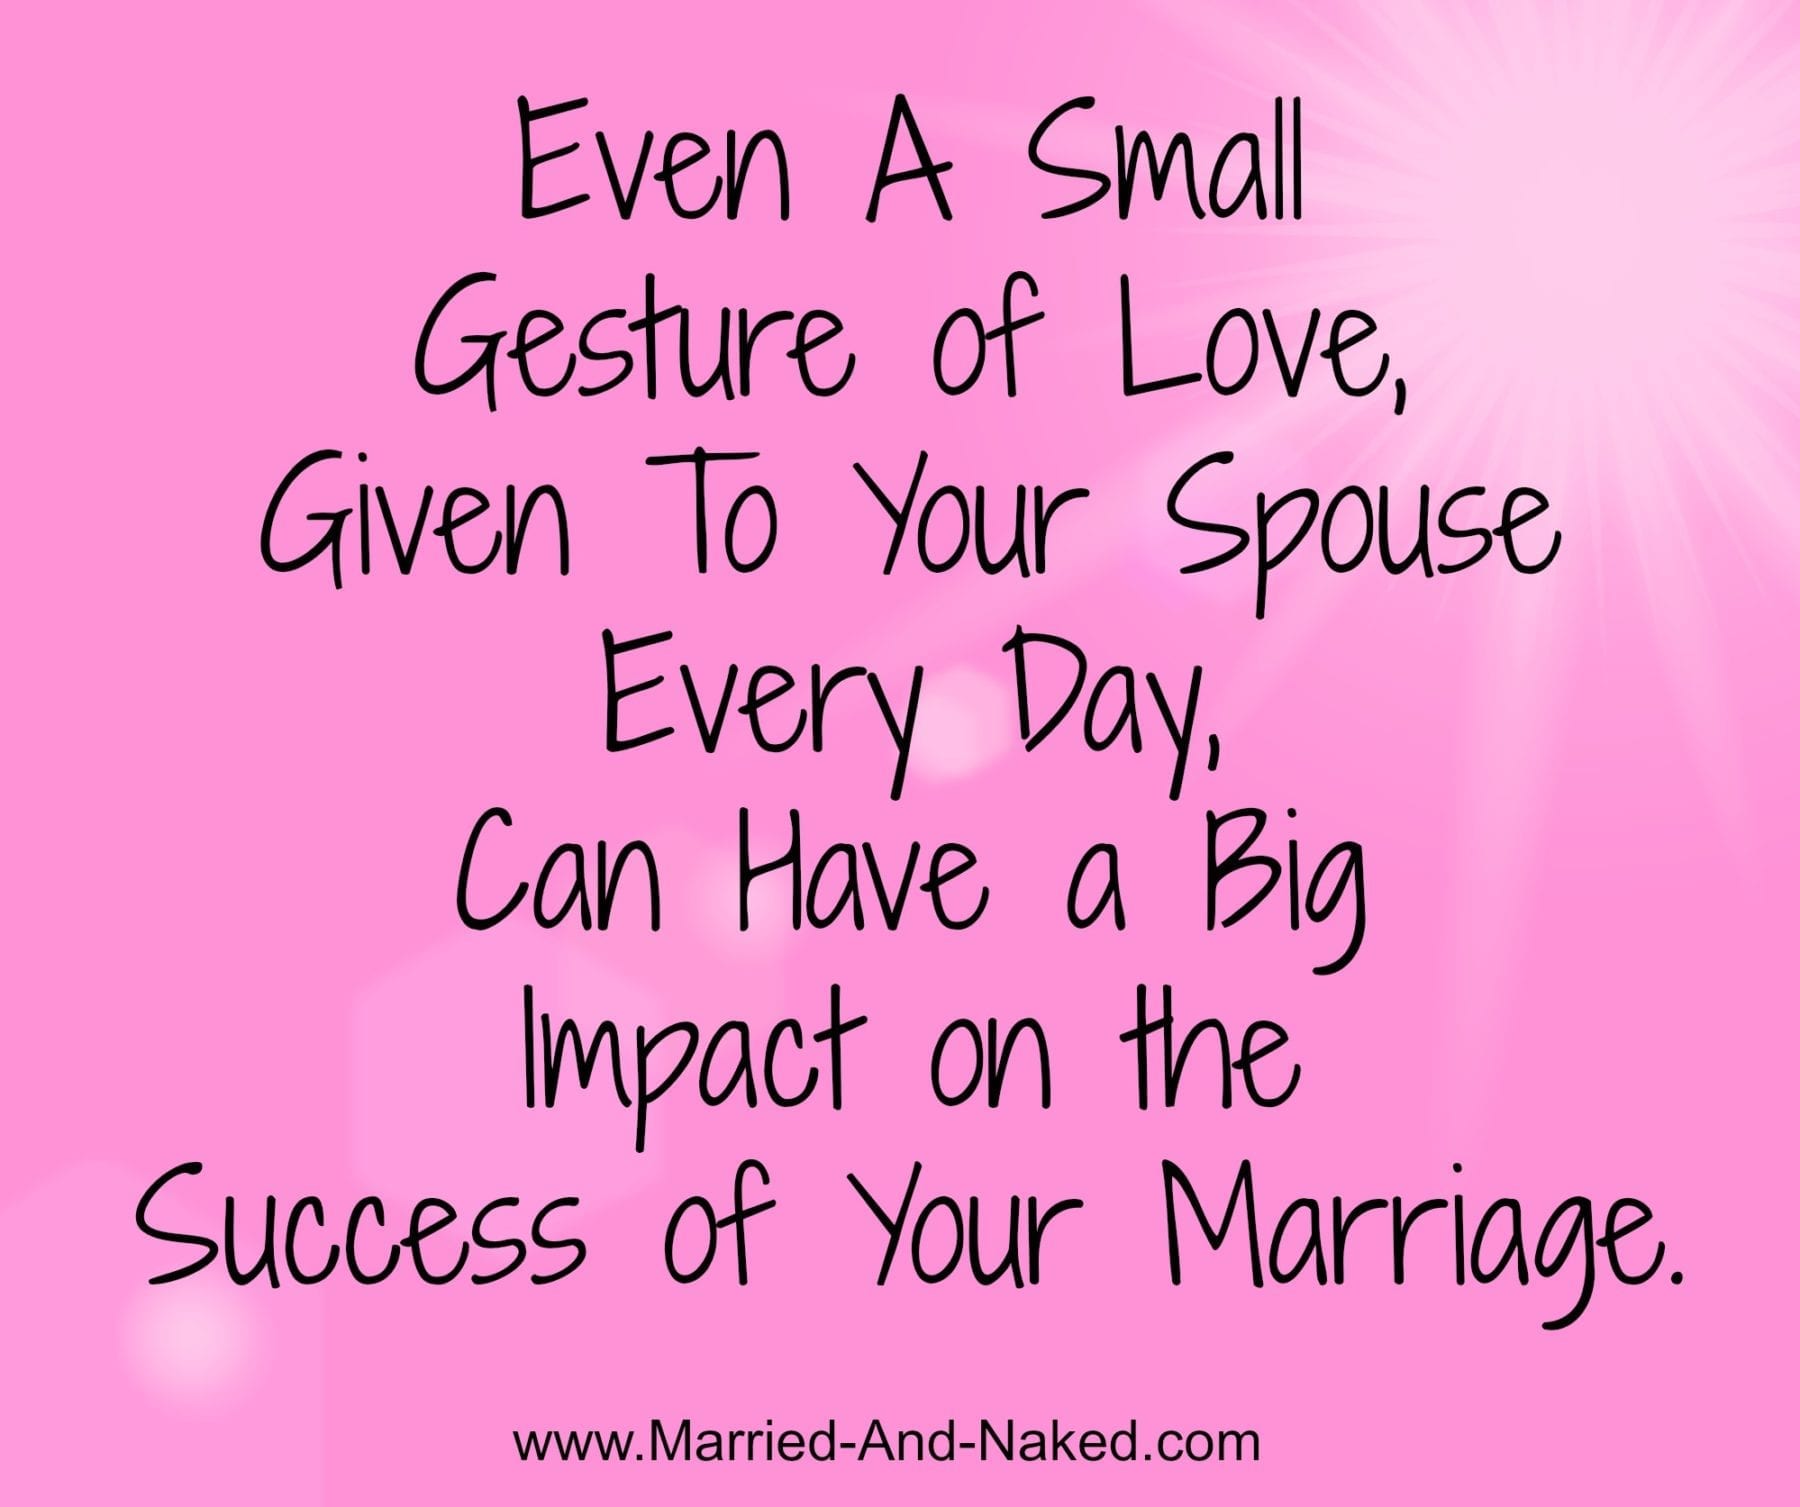 Even a small gesture of love - marriage quote- married and naked